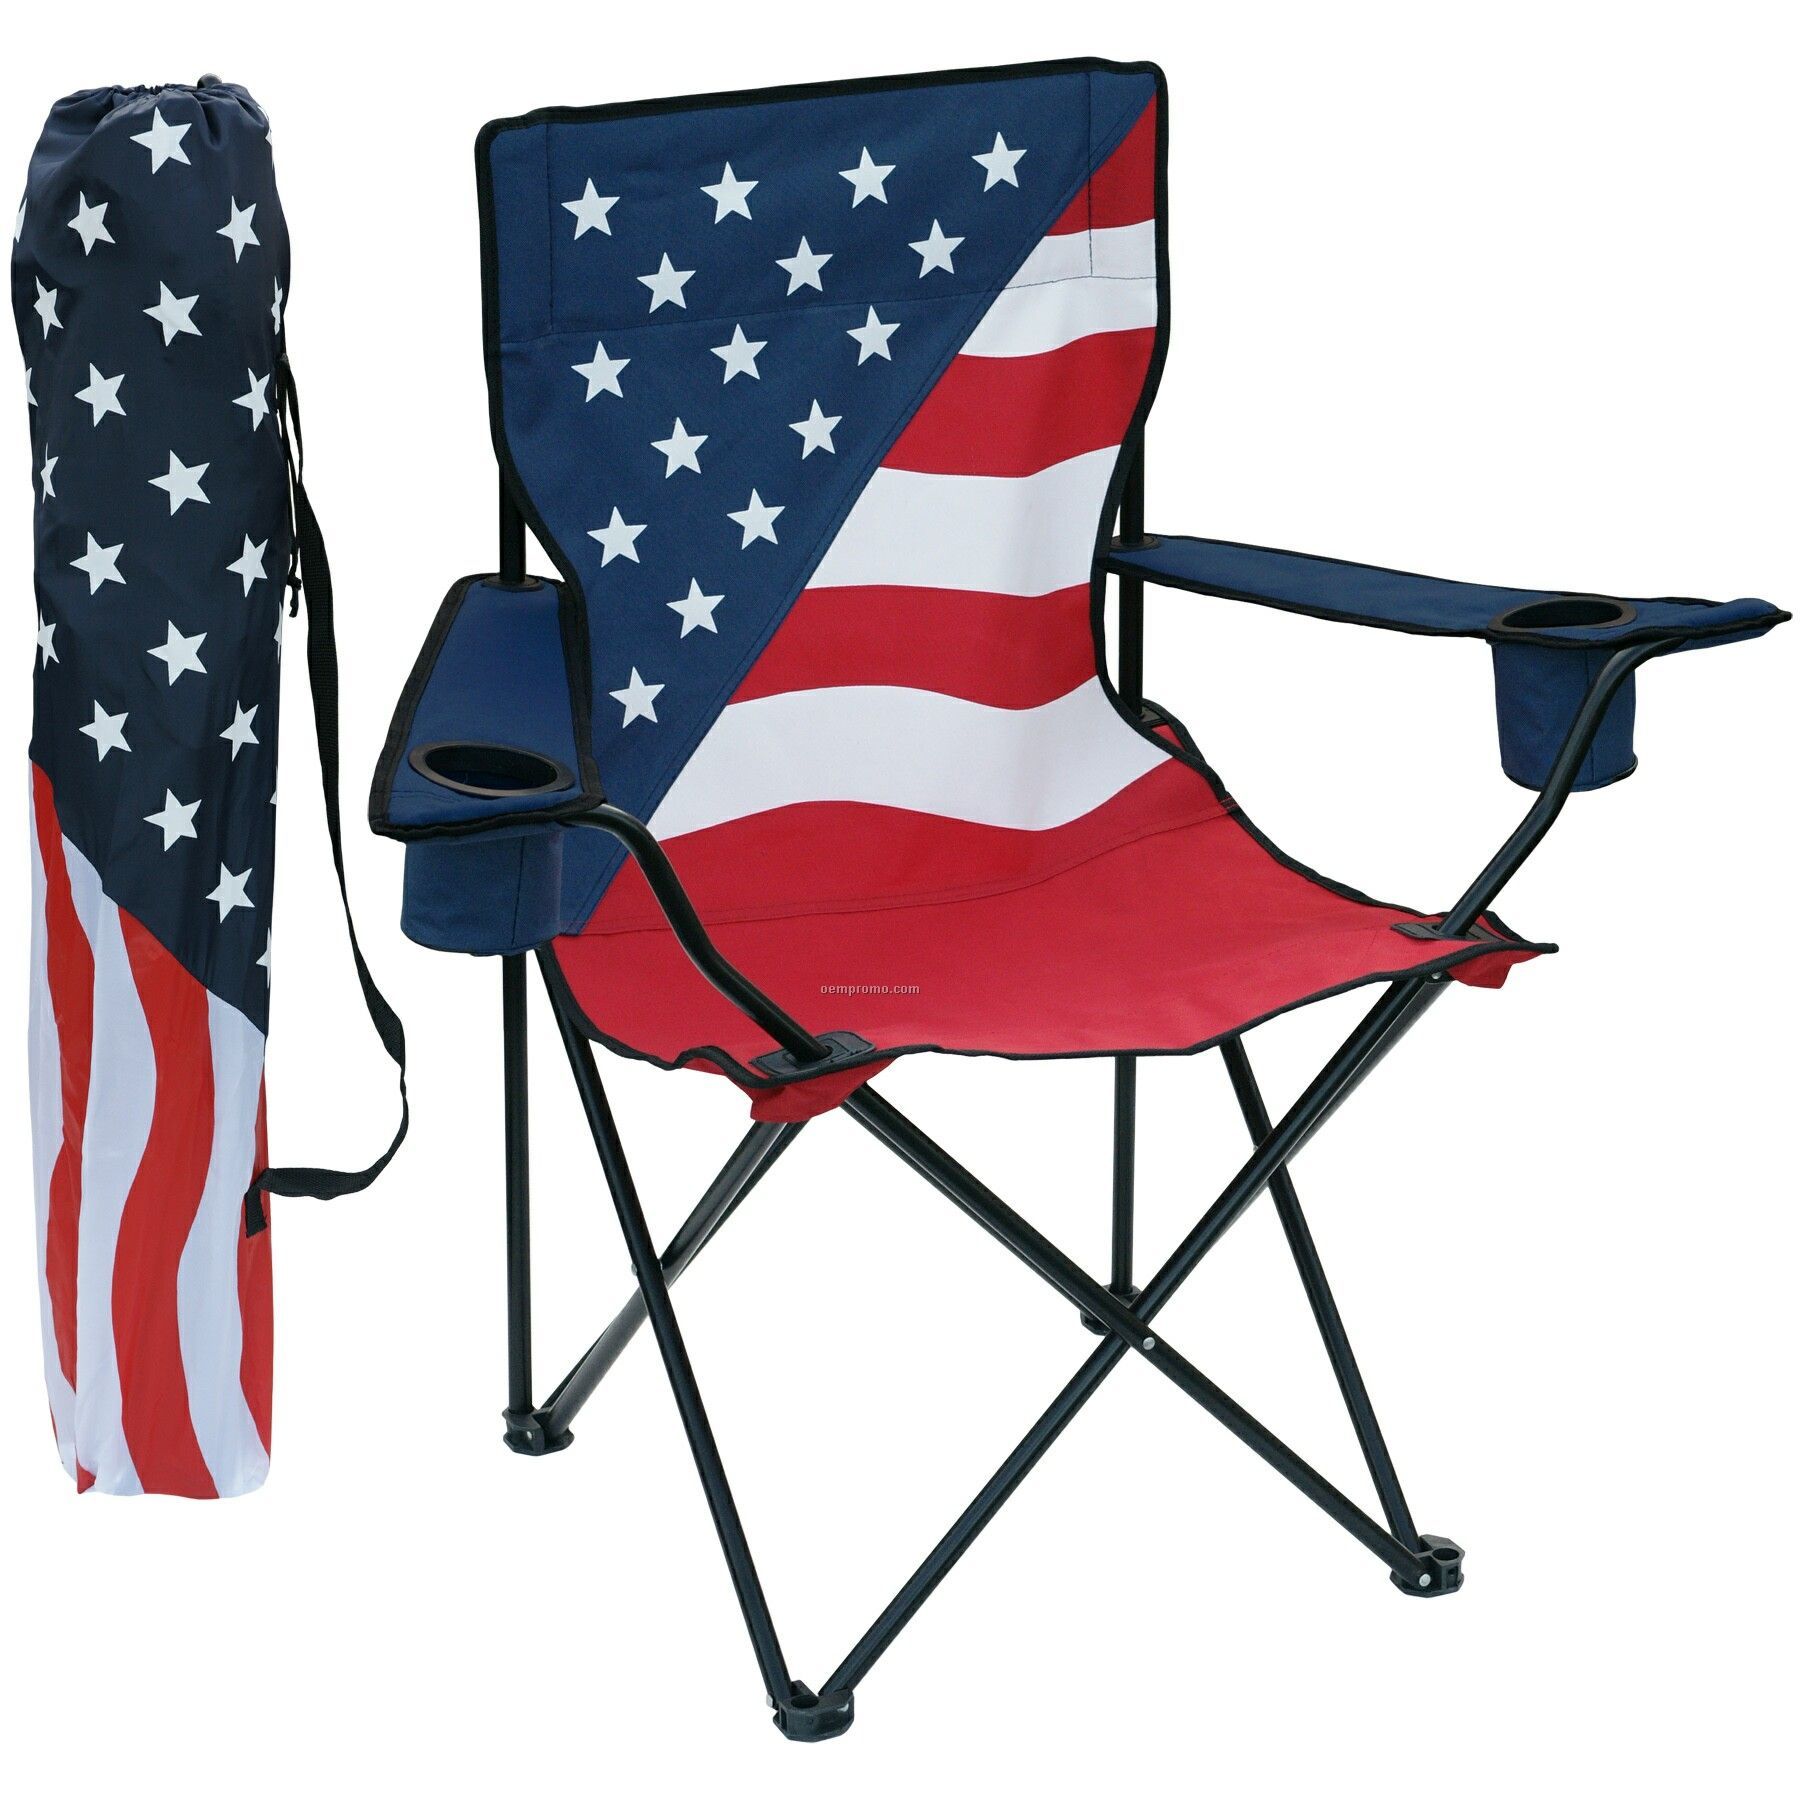 Patriotic Folding Chair W/Arm Rests, 2 Cup Holders And Matching Carry Bag.